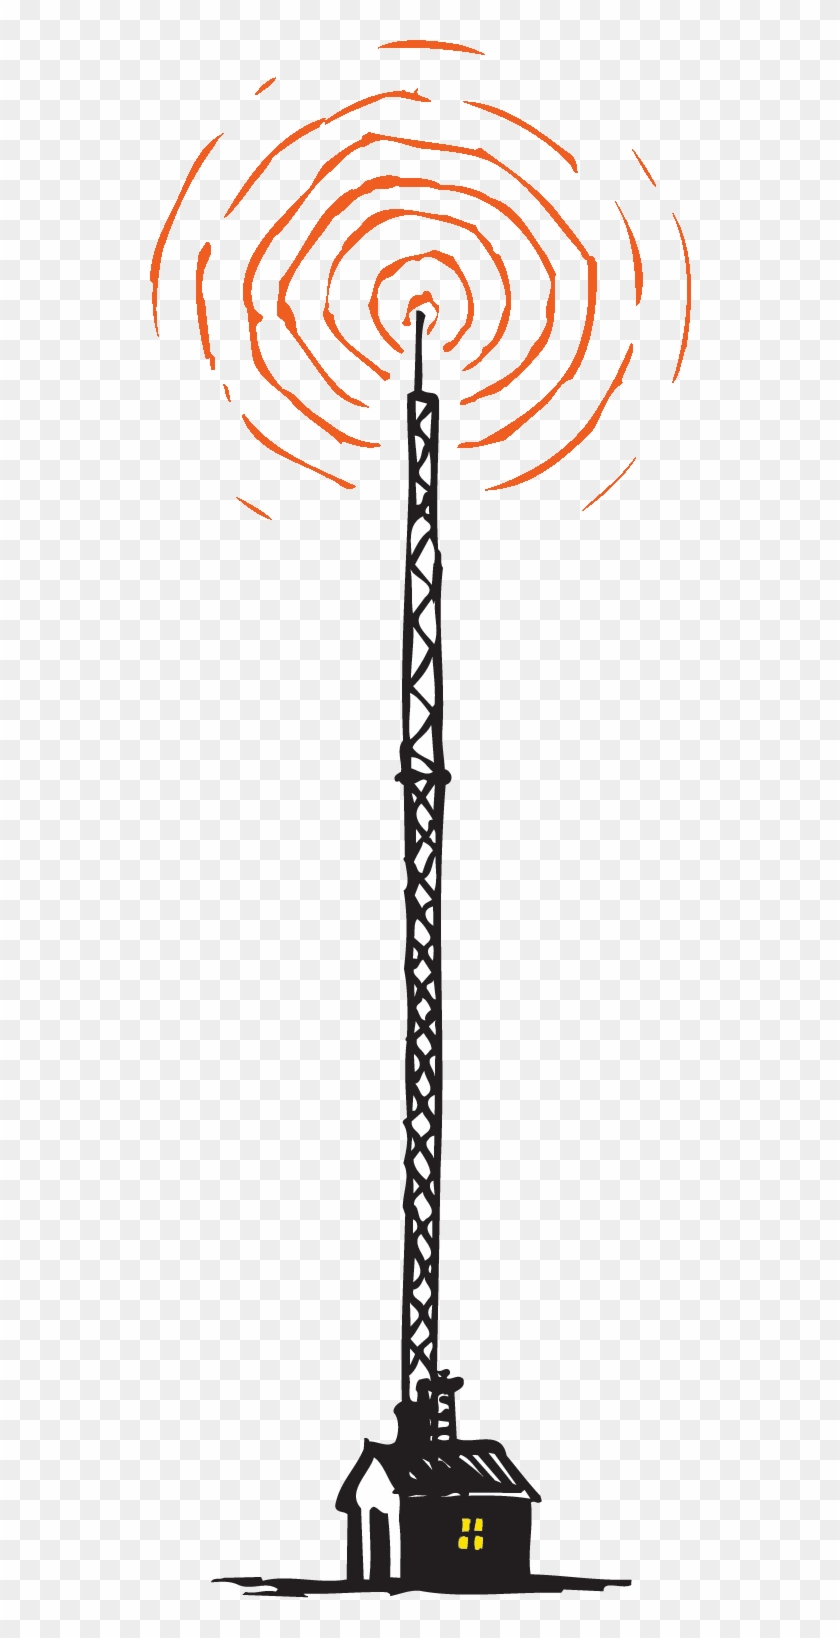 Color Version Radio Tower - Radio Station Tower Png Clipart